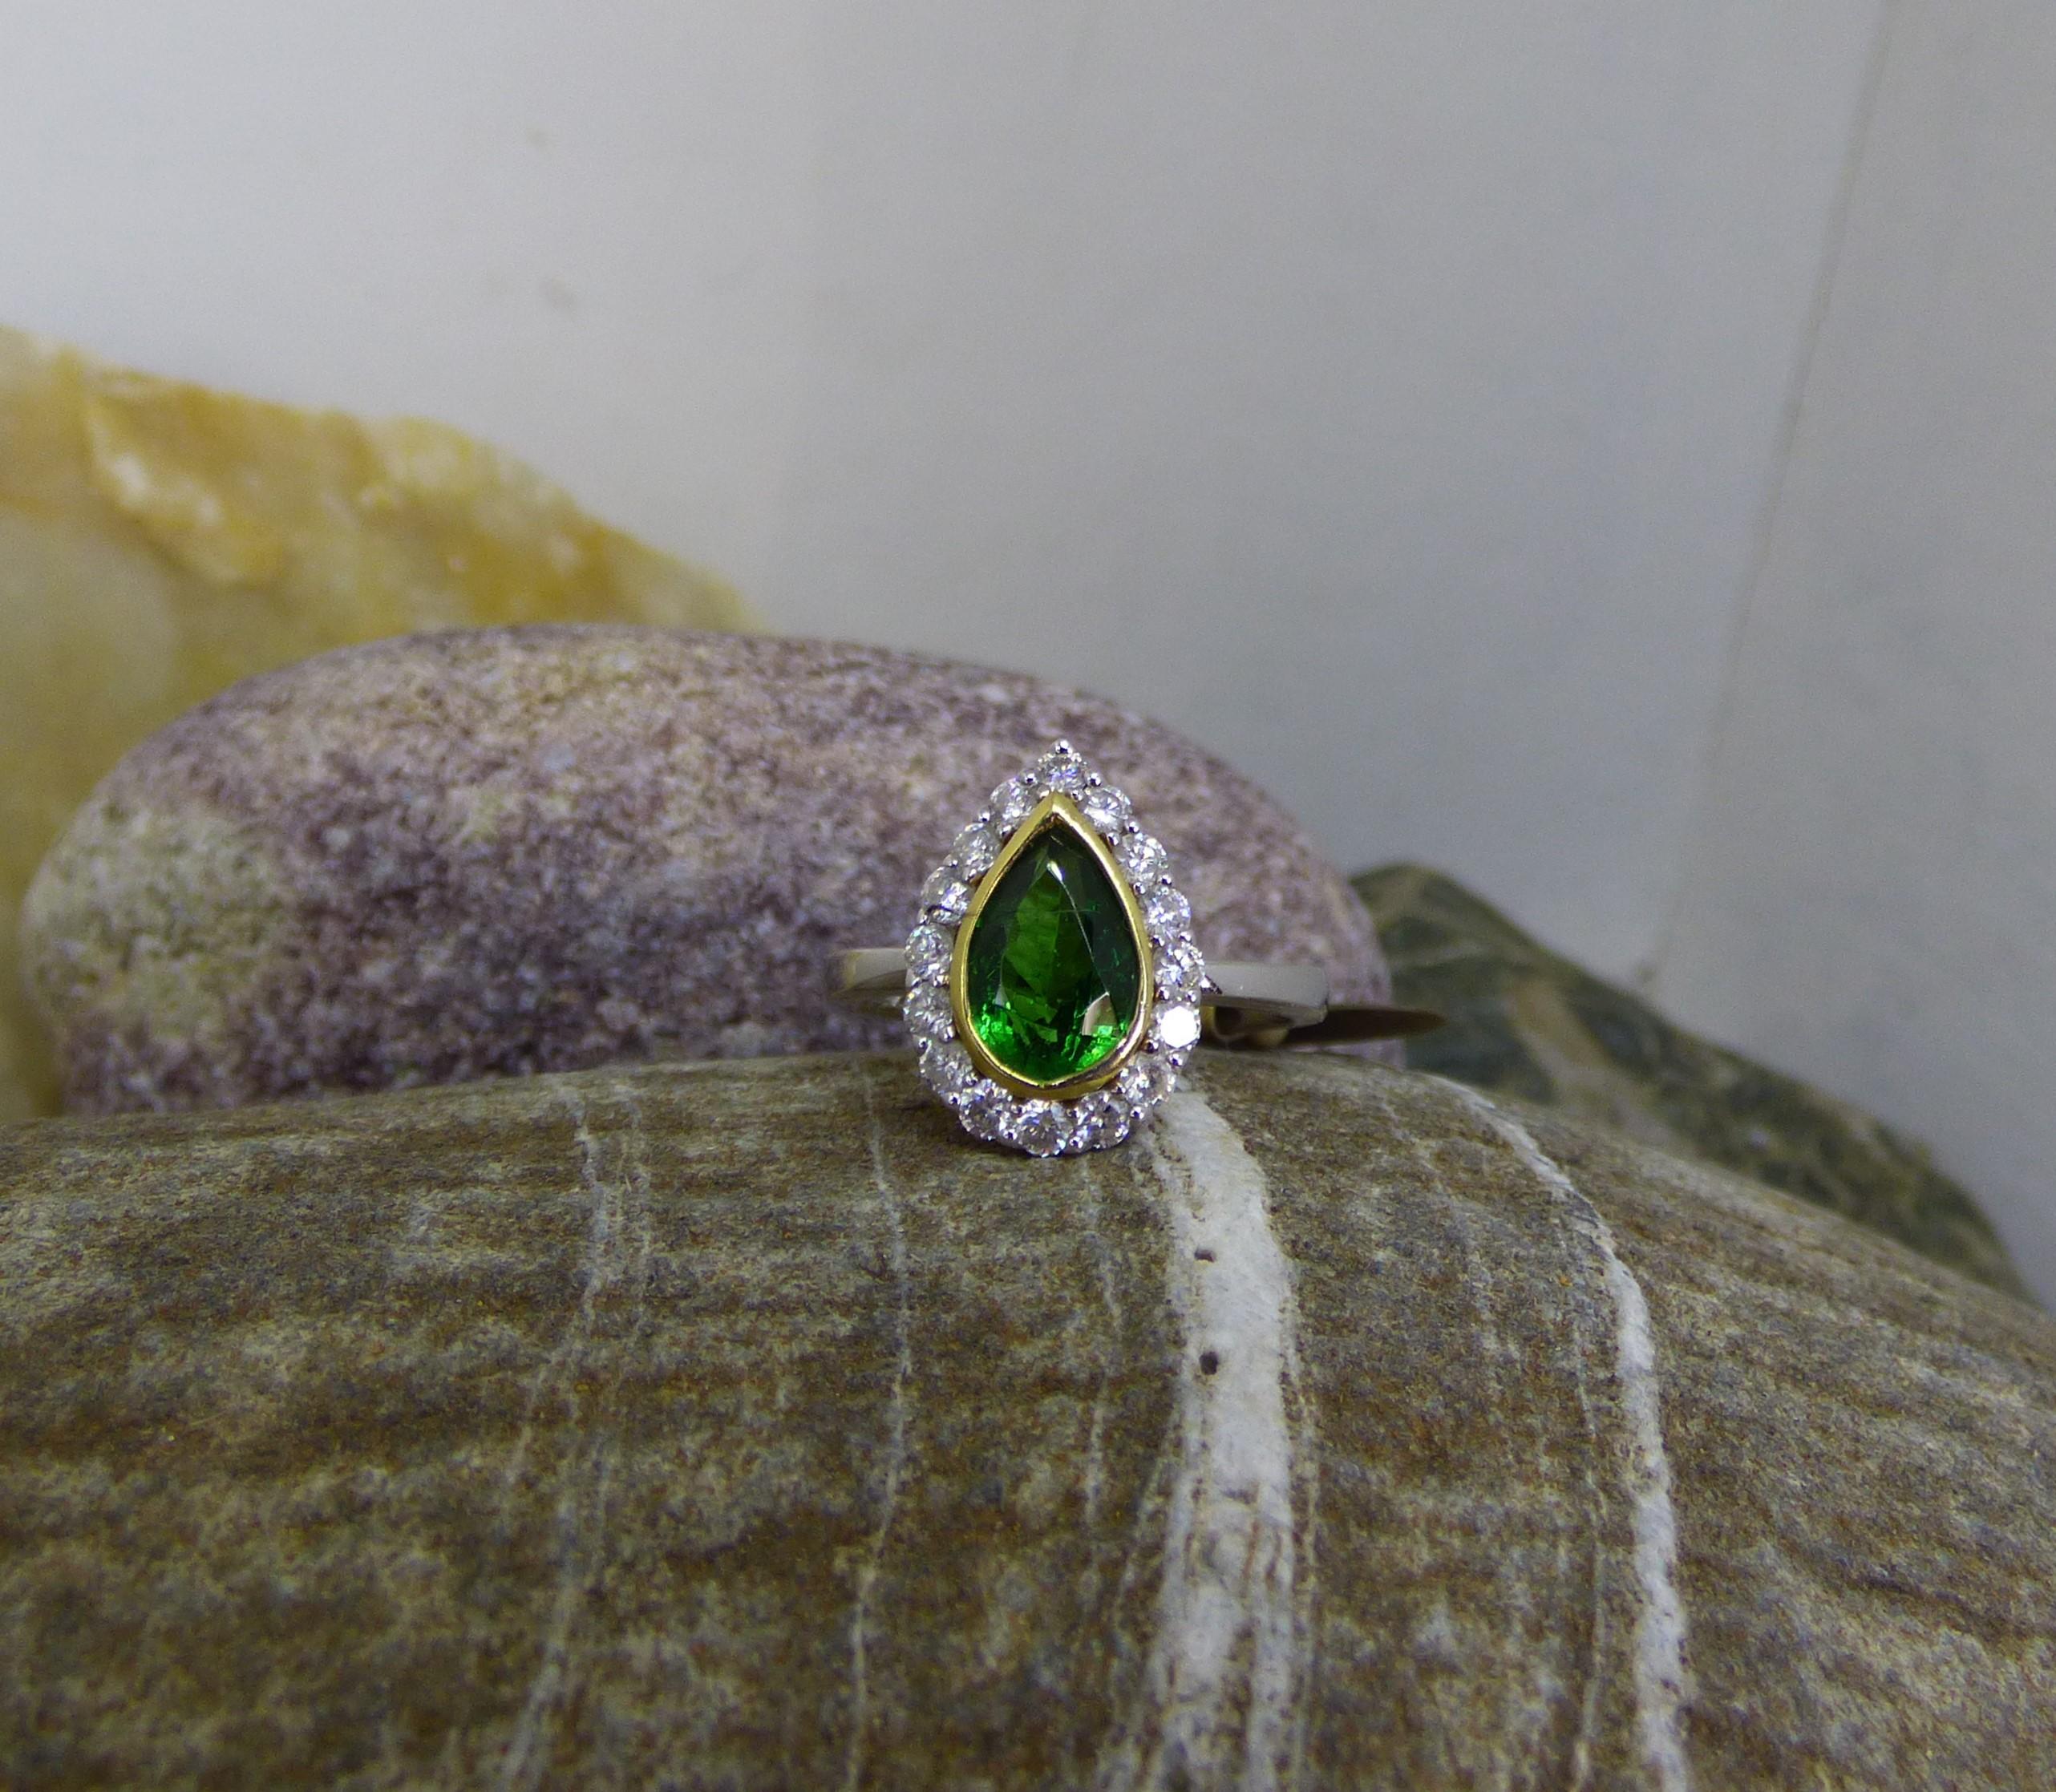 A brilliantly bright and colourful Tsavorite Garnet Pear stone is 10X6mm weighing 2.04ct.  This lovely Garnet is surrounded by 16 Diamonds with a total Diamond weight of .59ct.  The ring is handmade in 18K white gold with the Garnet bezel set in 18K